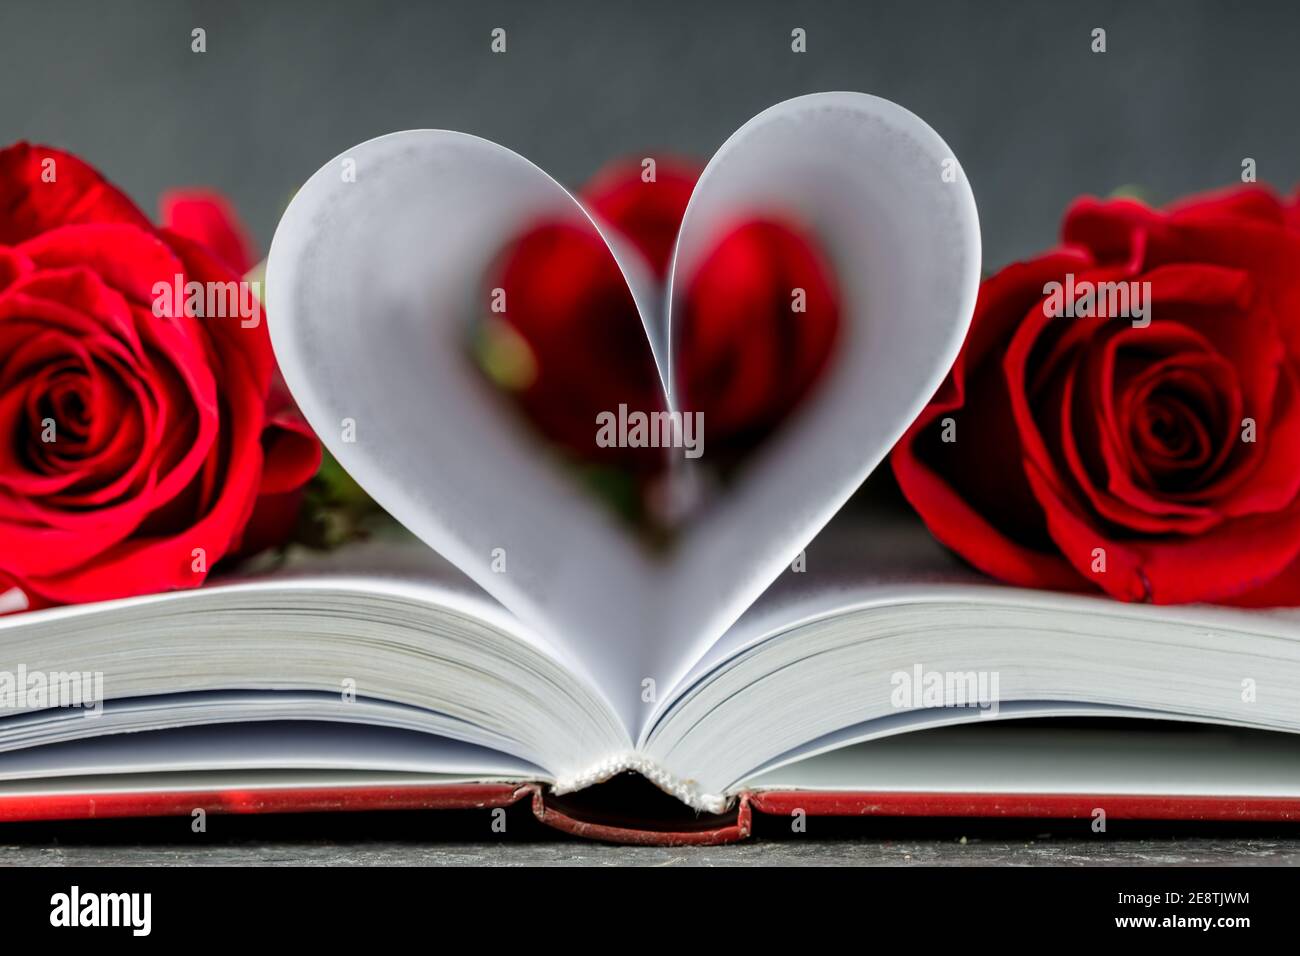 Hearth made with book pages. Valentine day concept with red roses ...